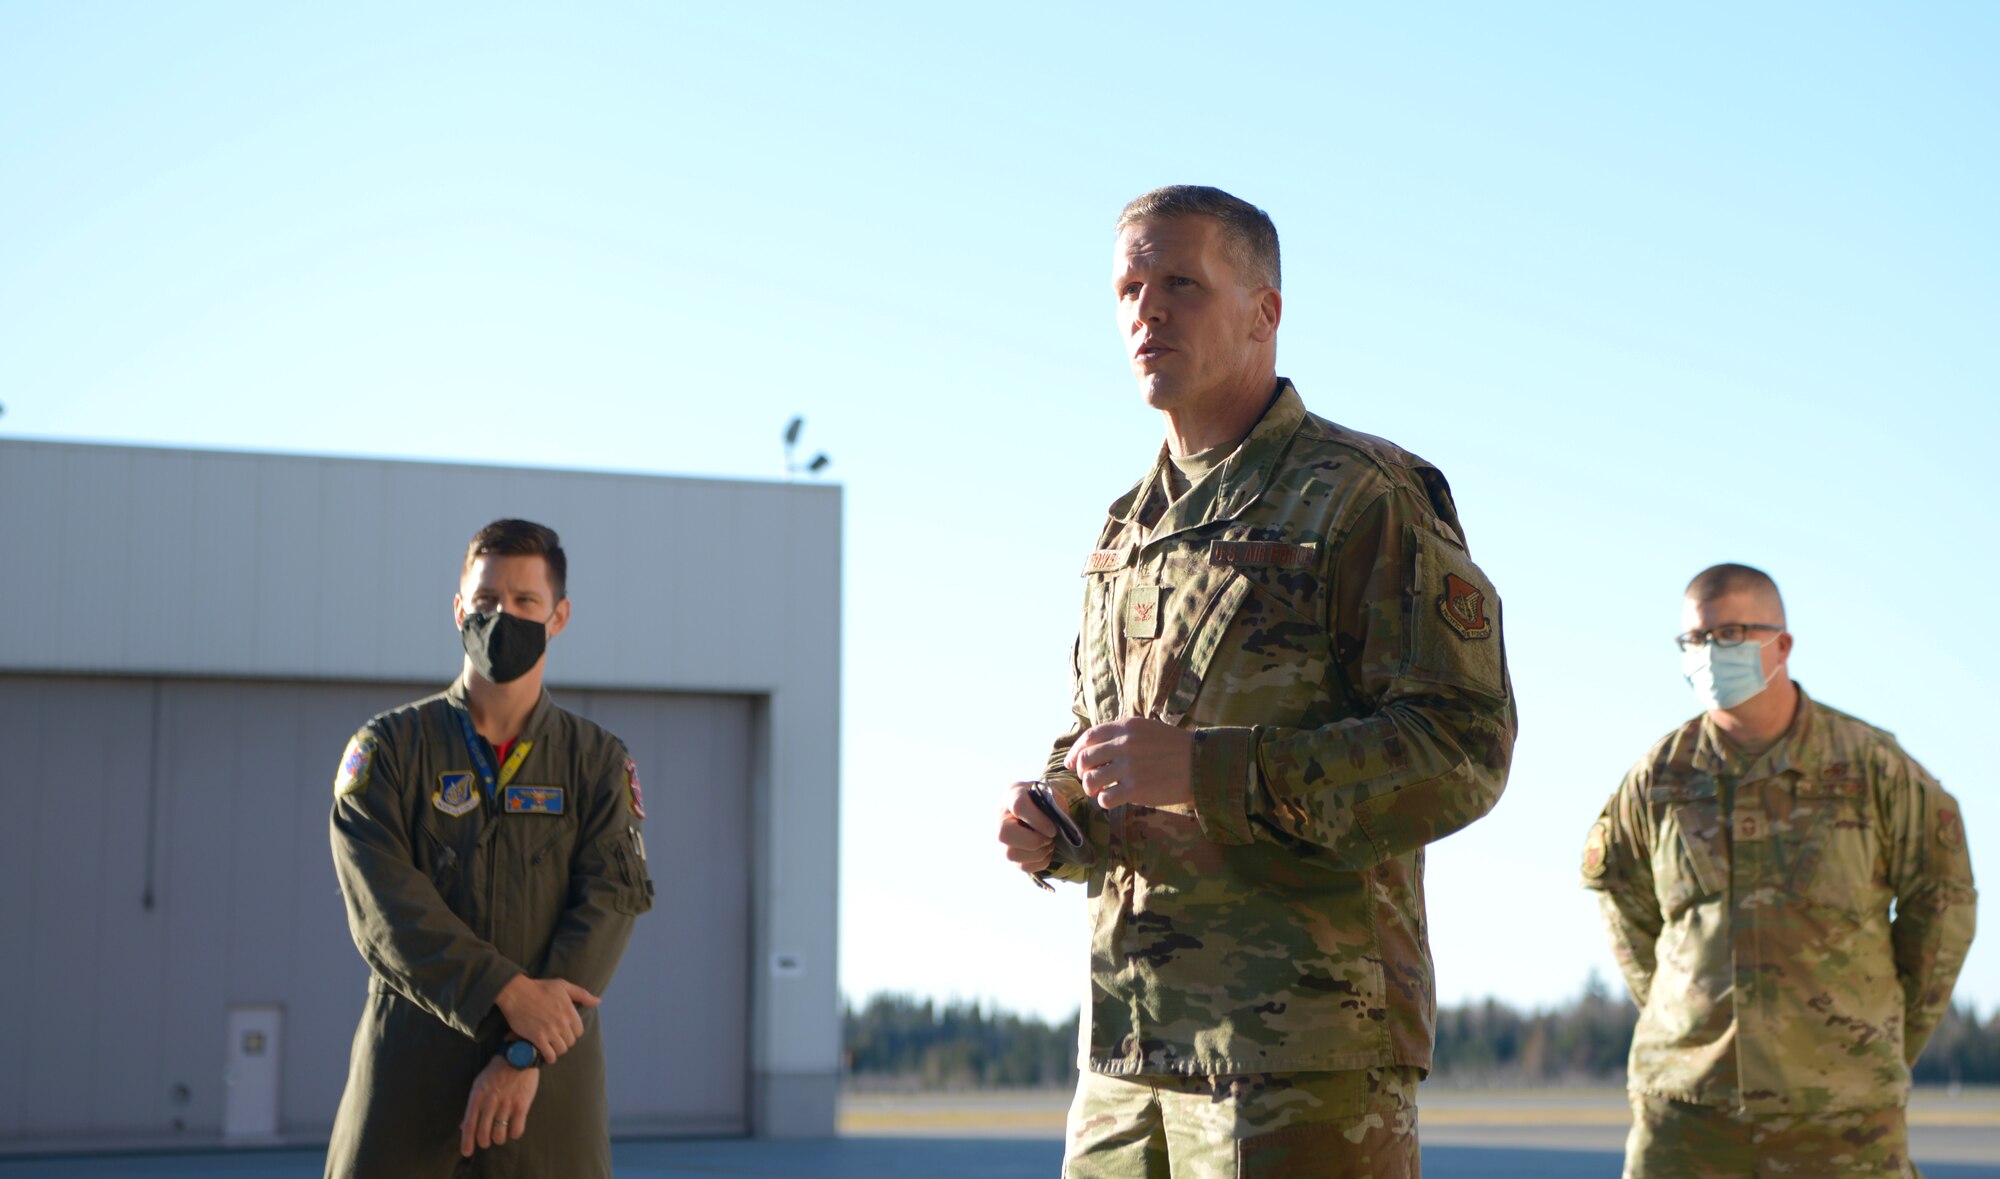 U.S. Air Force Col. Matthew Powell, the 354th Maintenance Group commander, speaks at a Dedicated Crew Chief (DCC) ceremony on Eielson Air Force Base, Alaska, Oct. 9, 2020. The ceremony recognized 29 maintenance Airmen for their commitment to their work and awarded the title of DCC. (U.S. Air Force photo by Senior Airman Beaux Hebert)